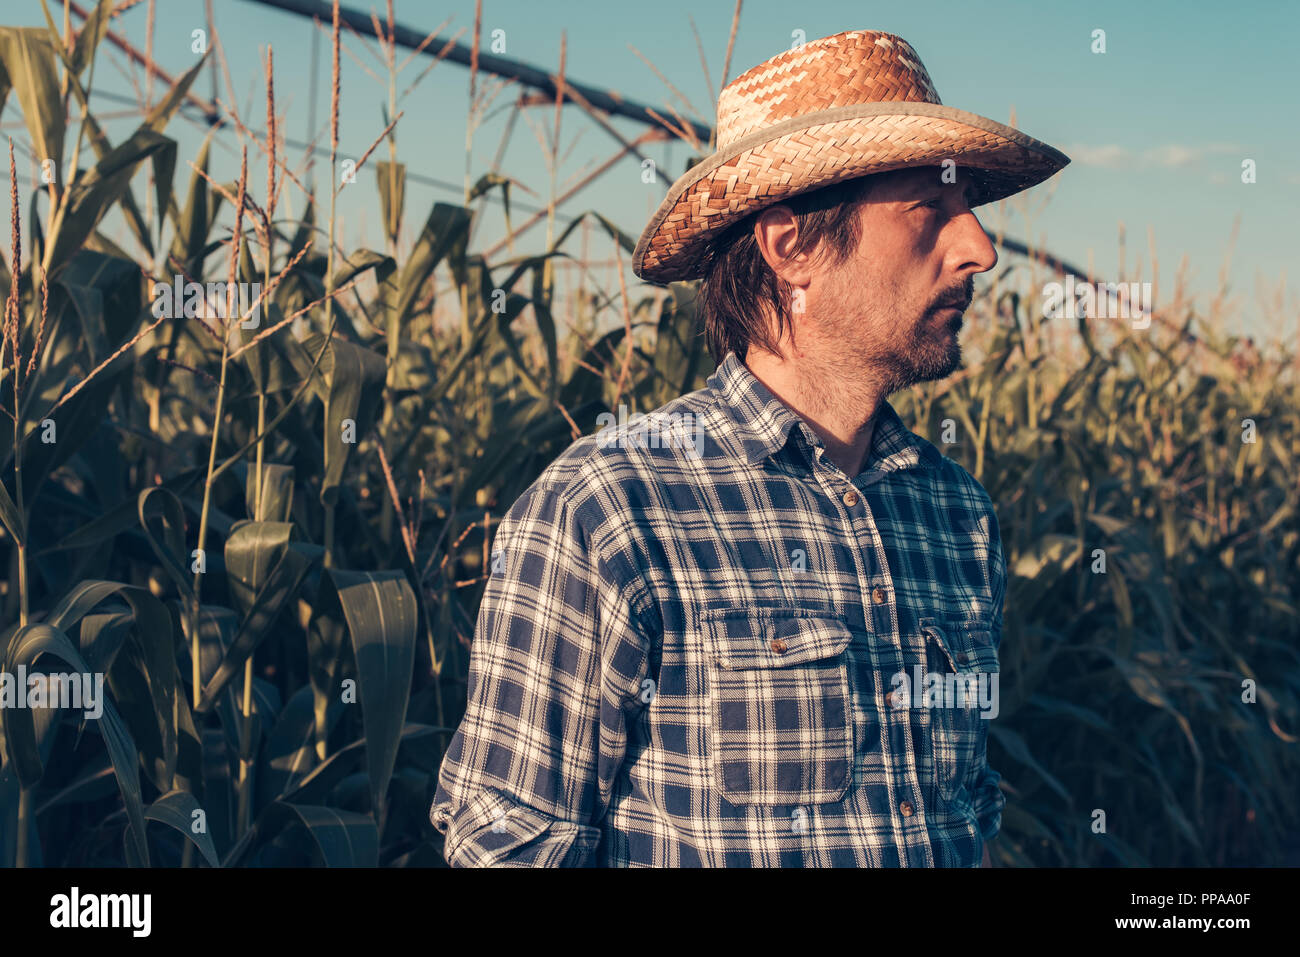 Portrait of serious agronomist in corn field, looking confident and determined Stock Photo